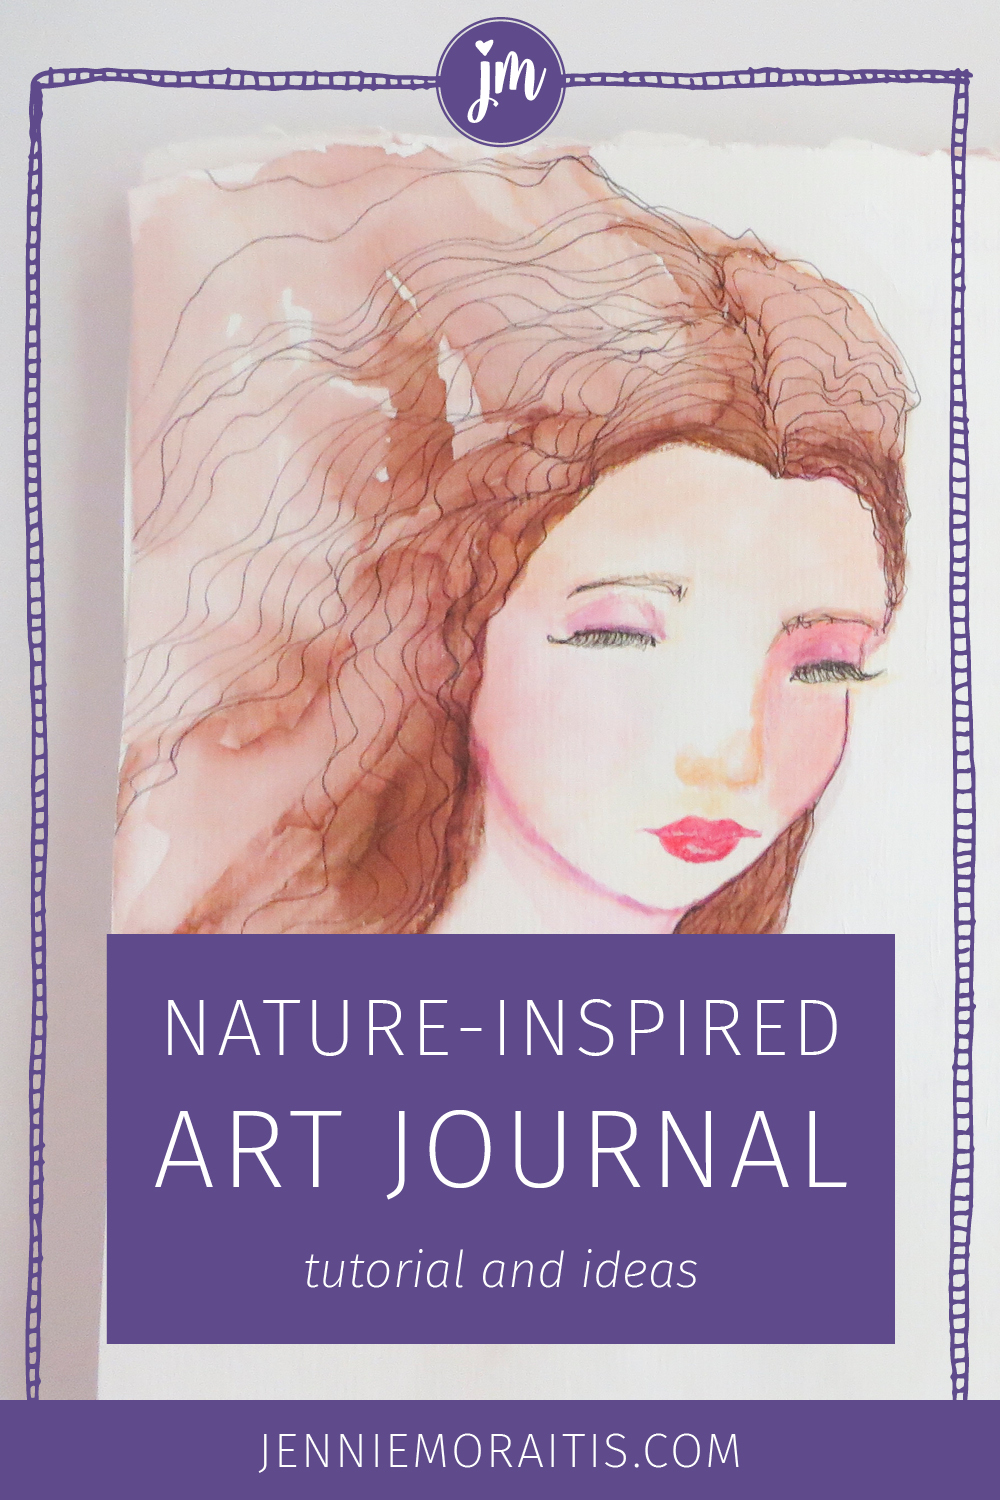 Don't we all need more magic in our lives? This sweet fairy princess was inspired by a forest walk. Learn how to make your own magical spread in your art journal! #princess #artjournal